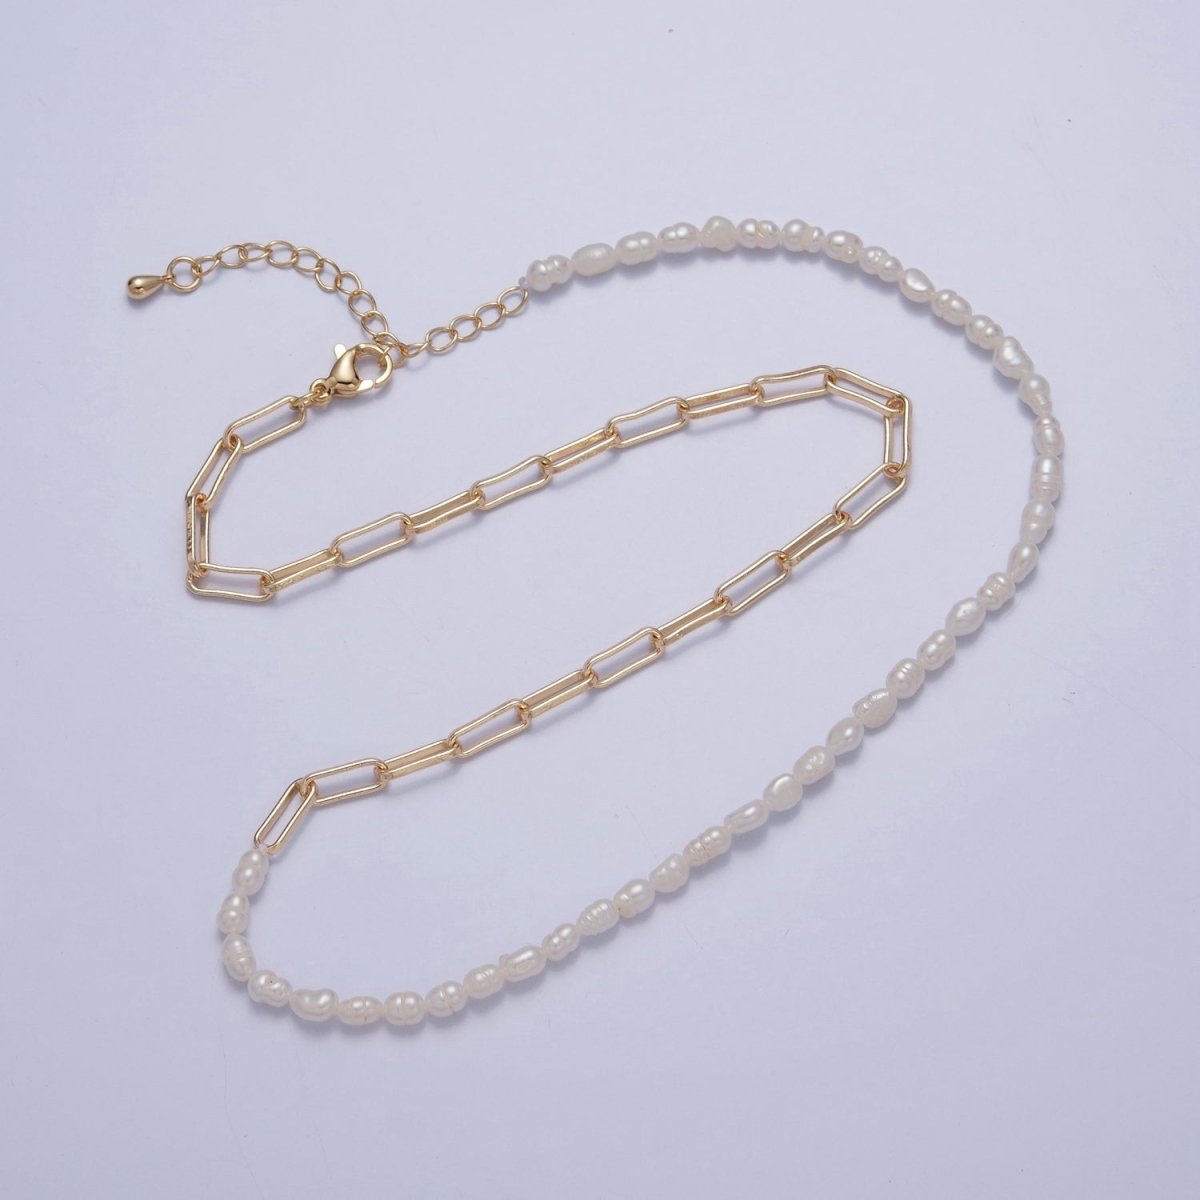 Half Pearl Half chain necklace in 18k gold fill | Layer Necklace Gold Paper Clip chain with White Freshwater Pearl | WA-1064 Clearance Pricing - DLUXCA